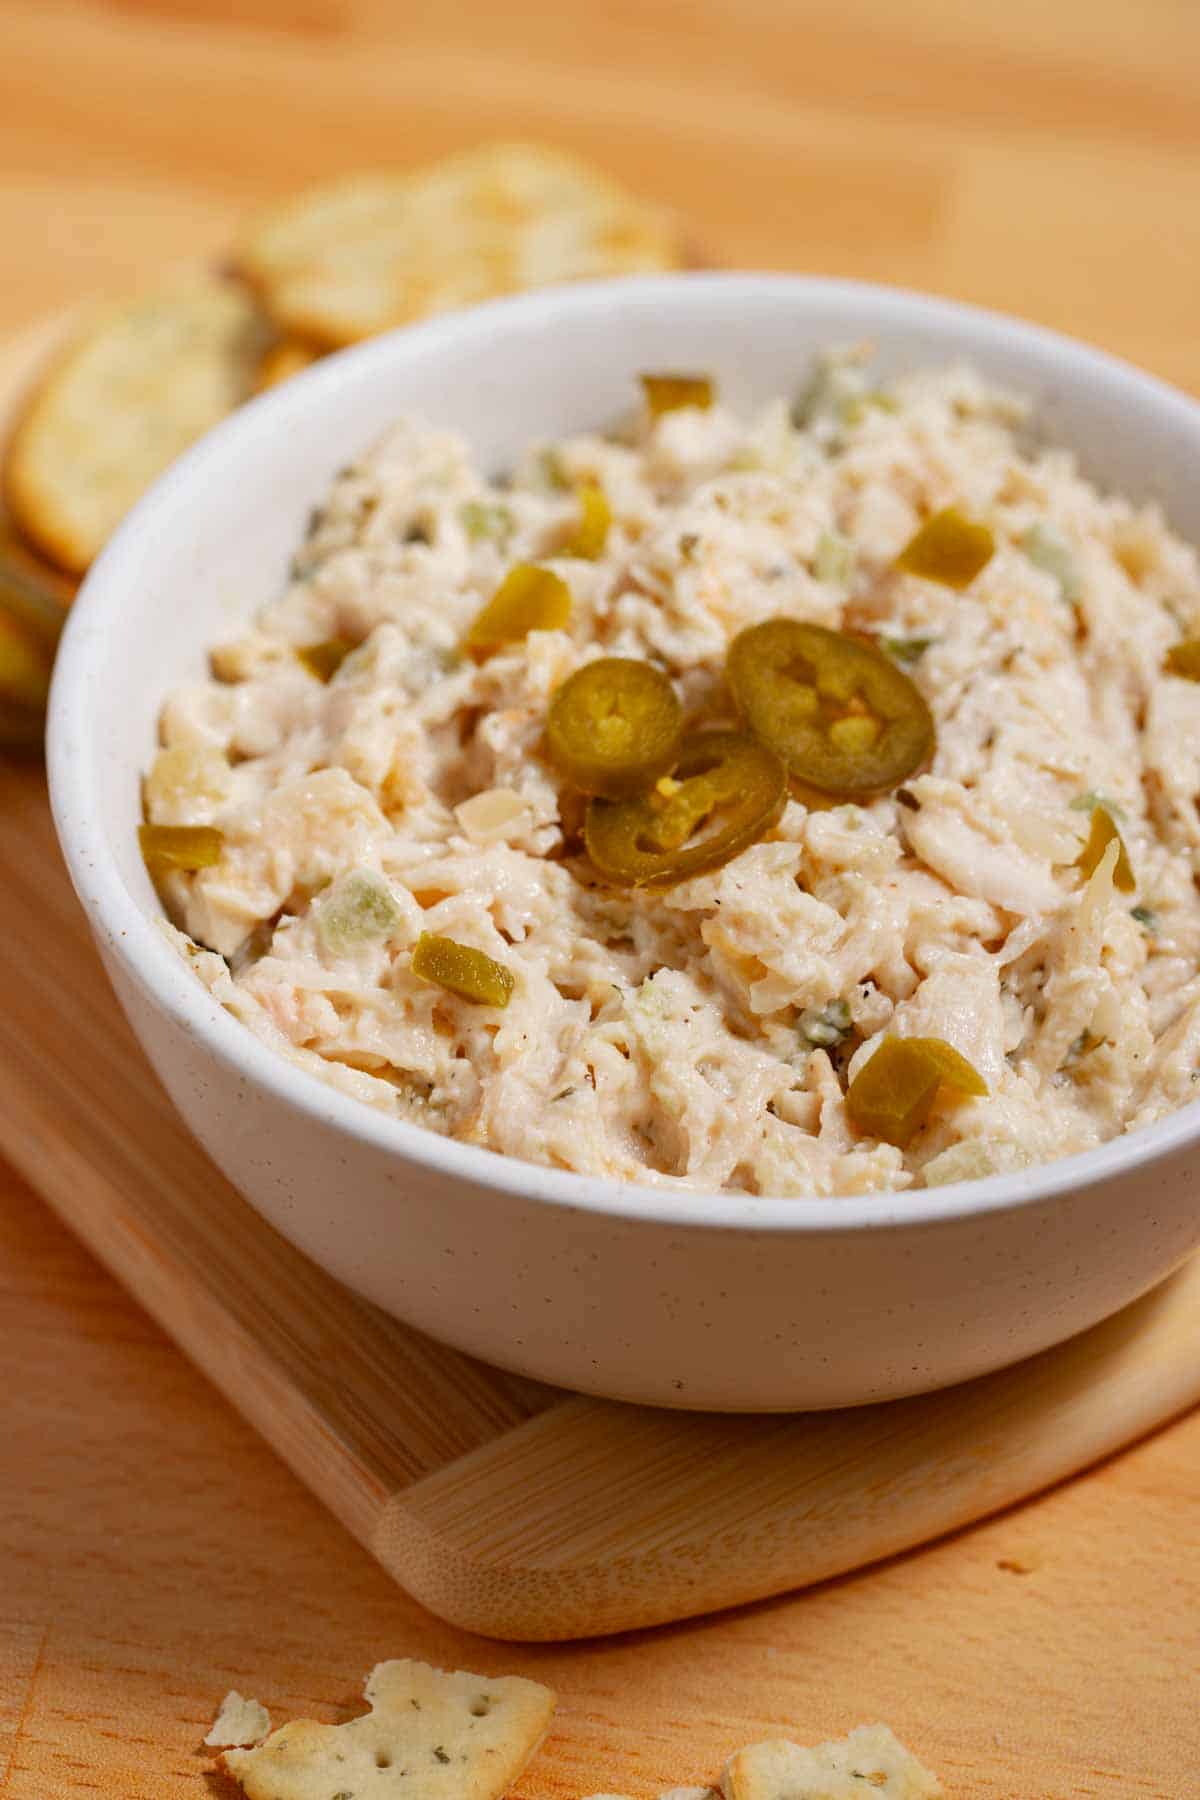 Pickled jalapenos in store-bought chicken salad to jazz it up.